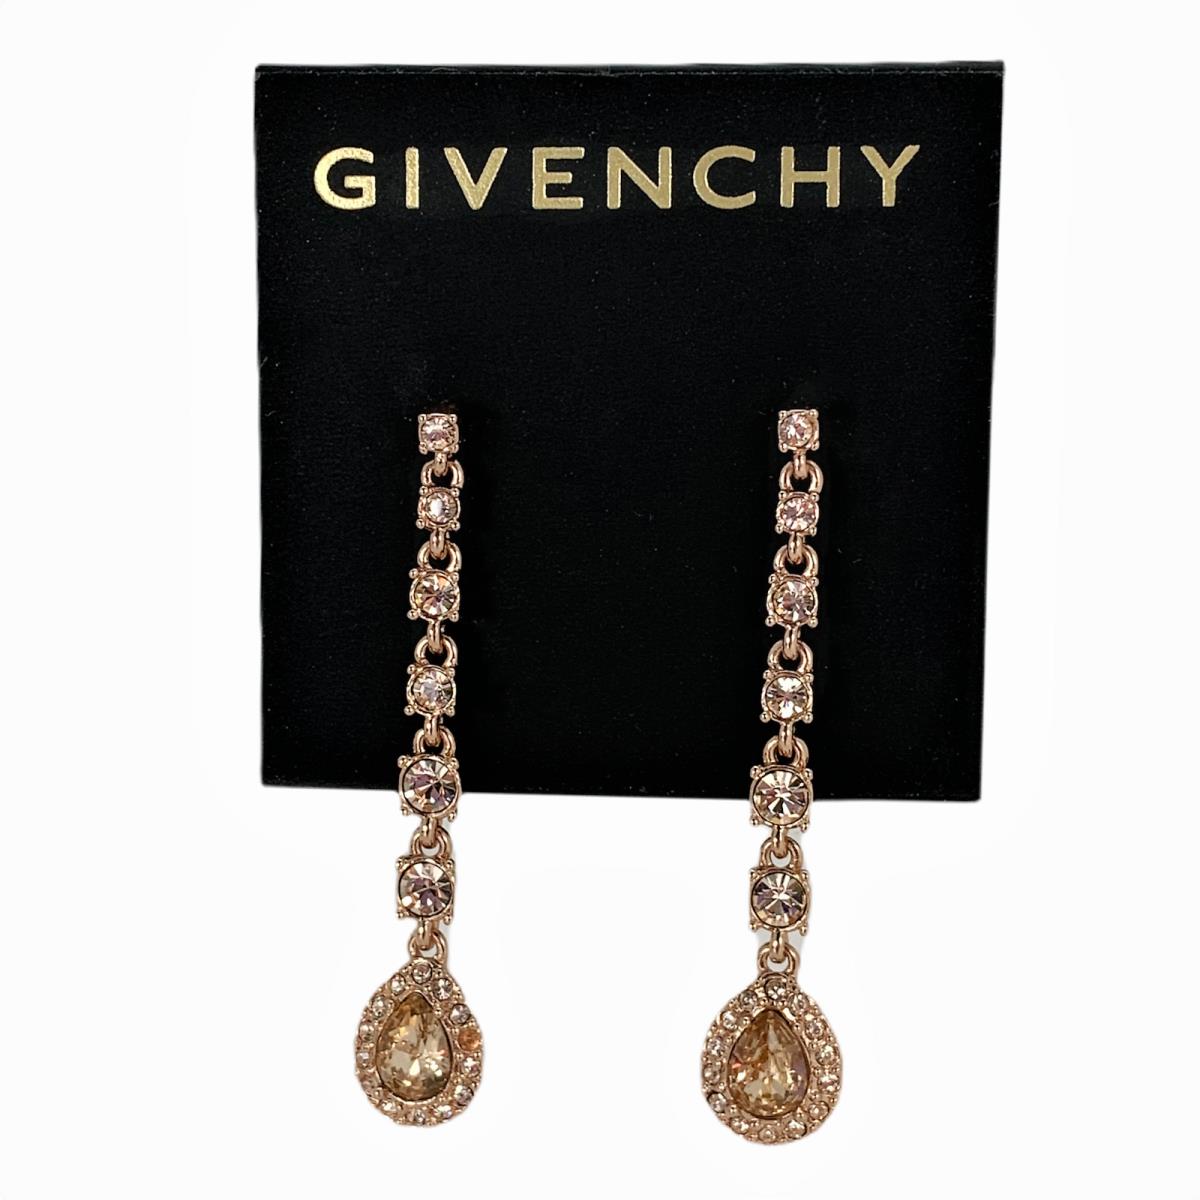 Givenchy Crystal Linear Drop Earrings Rose Gold Tone Faceted Teardrop